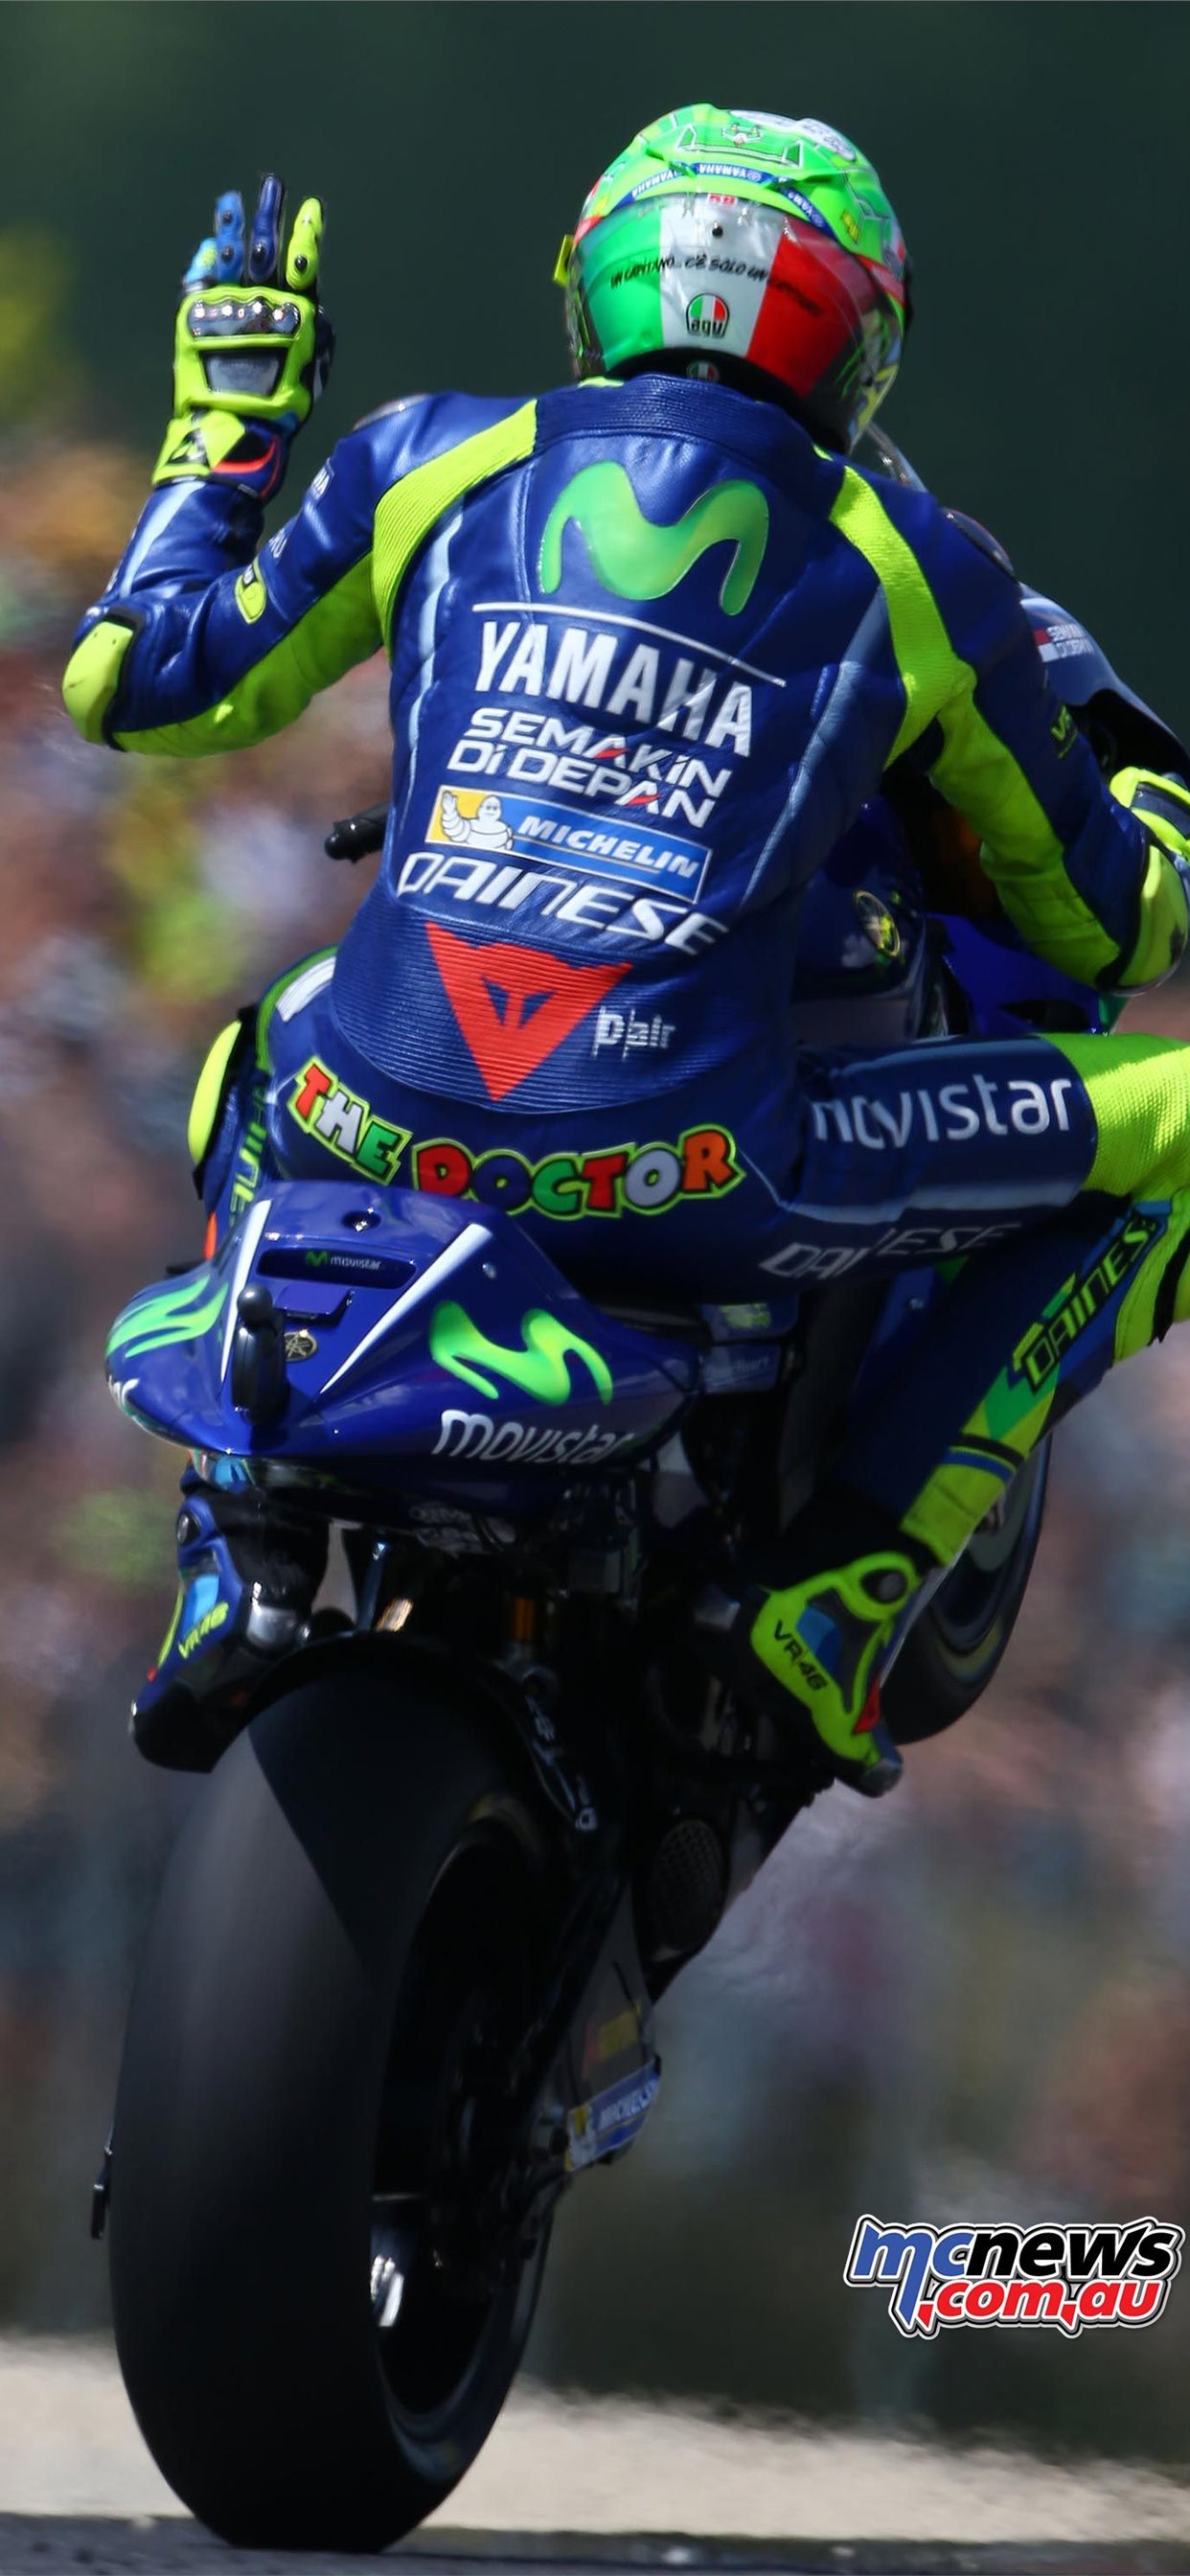 Valentino Rossi iPhone X Wallpapers Free Download